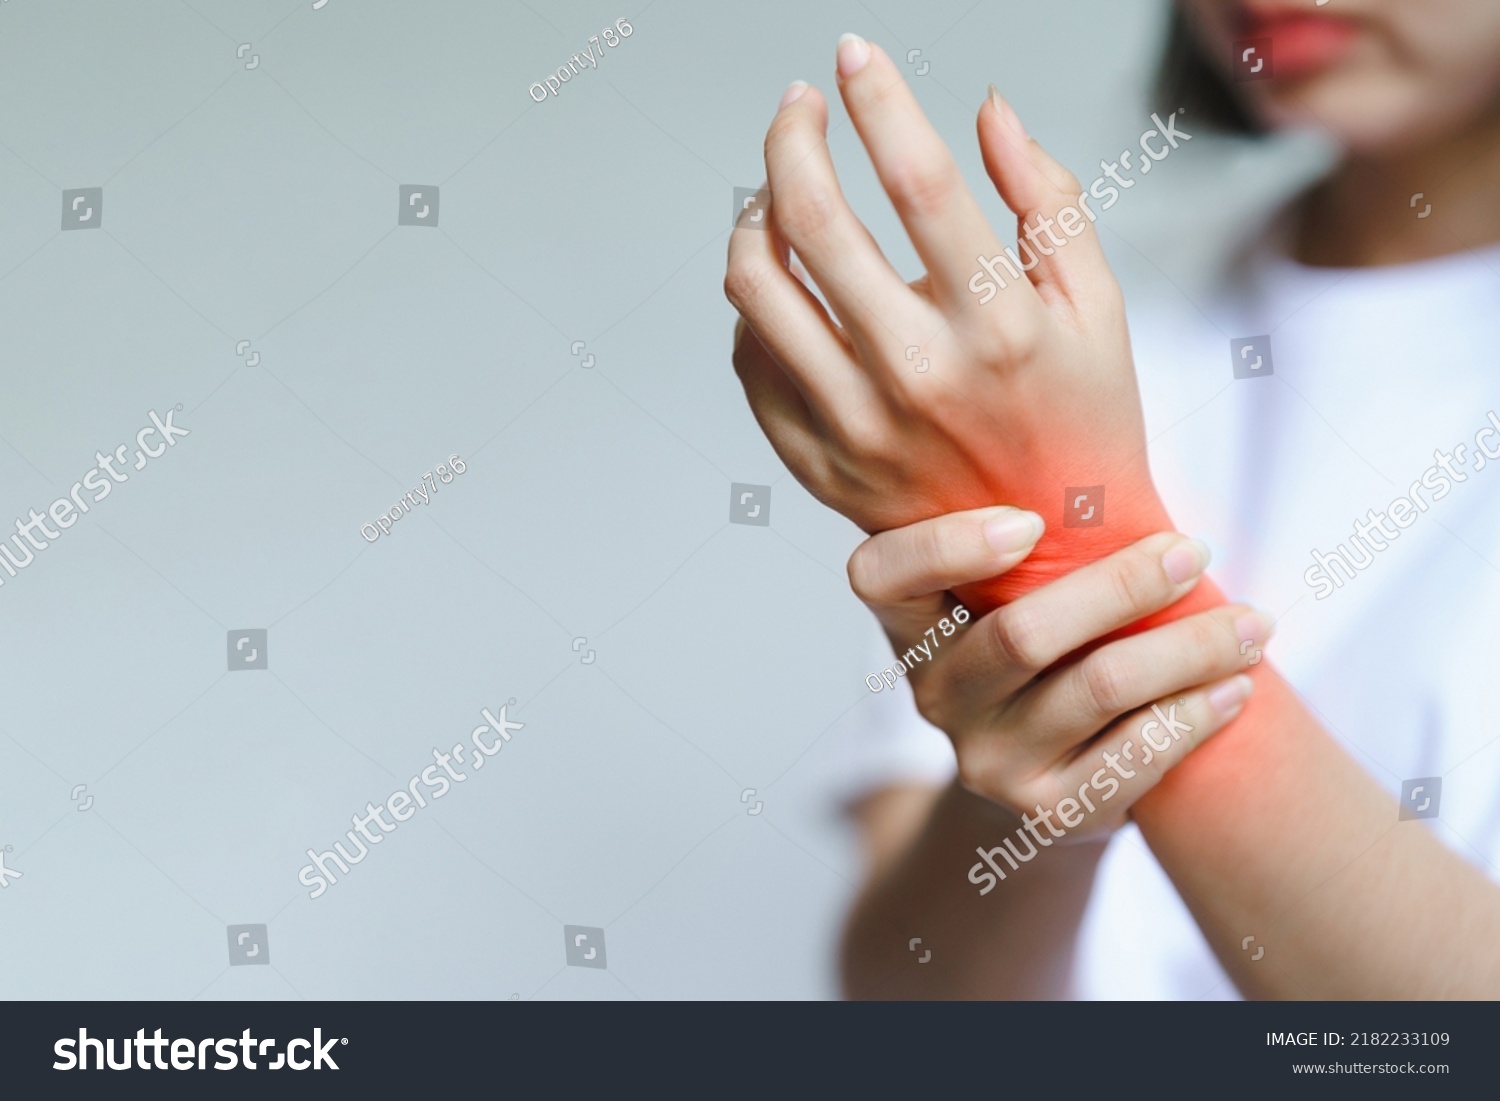 A woman has pain in her wrist. Health care concept. #2182233109